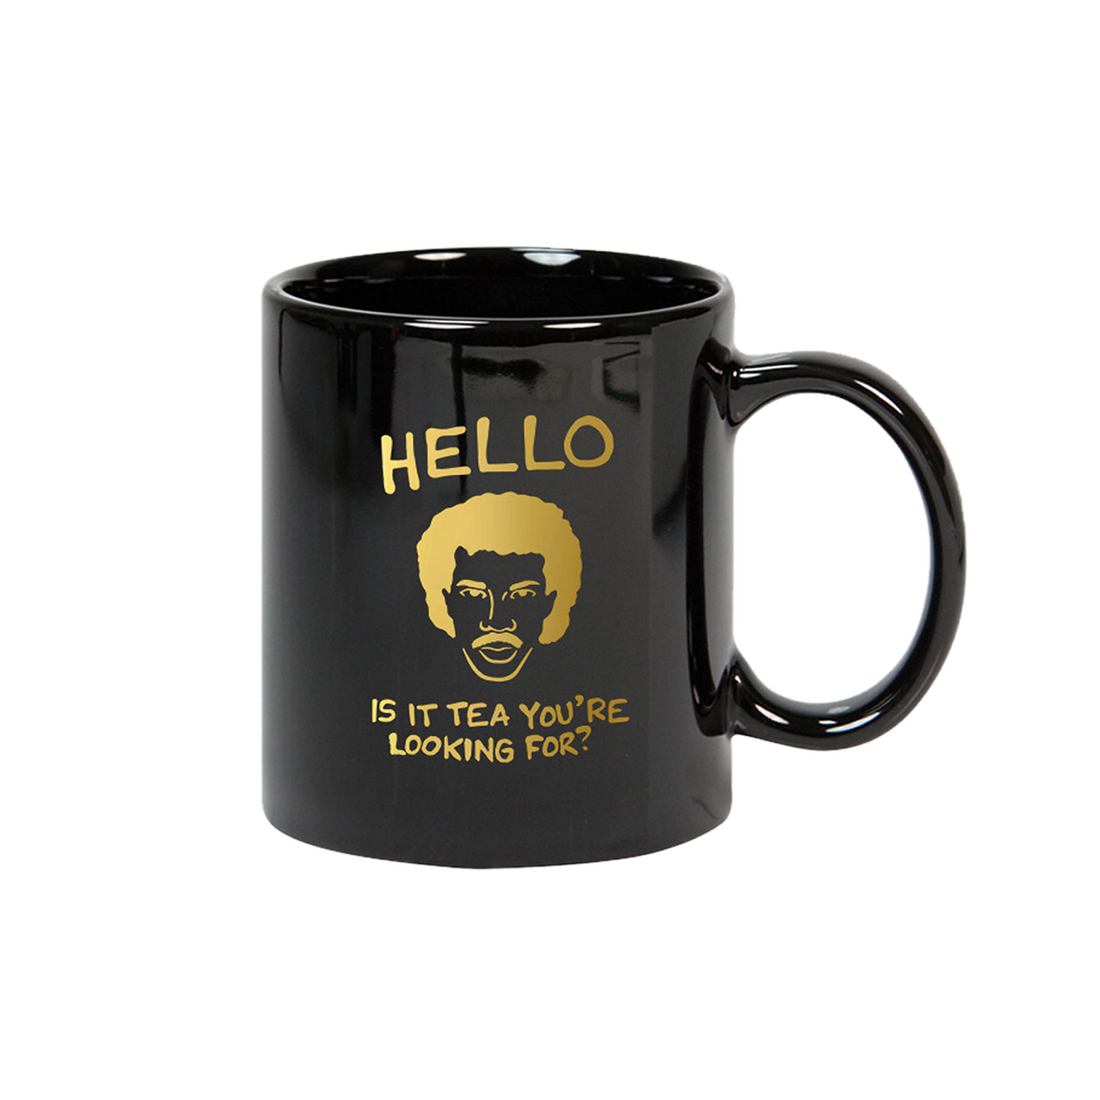 Is it Tea You're Looking For? Mug